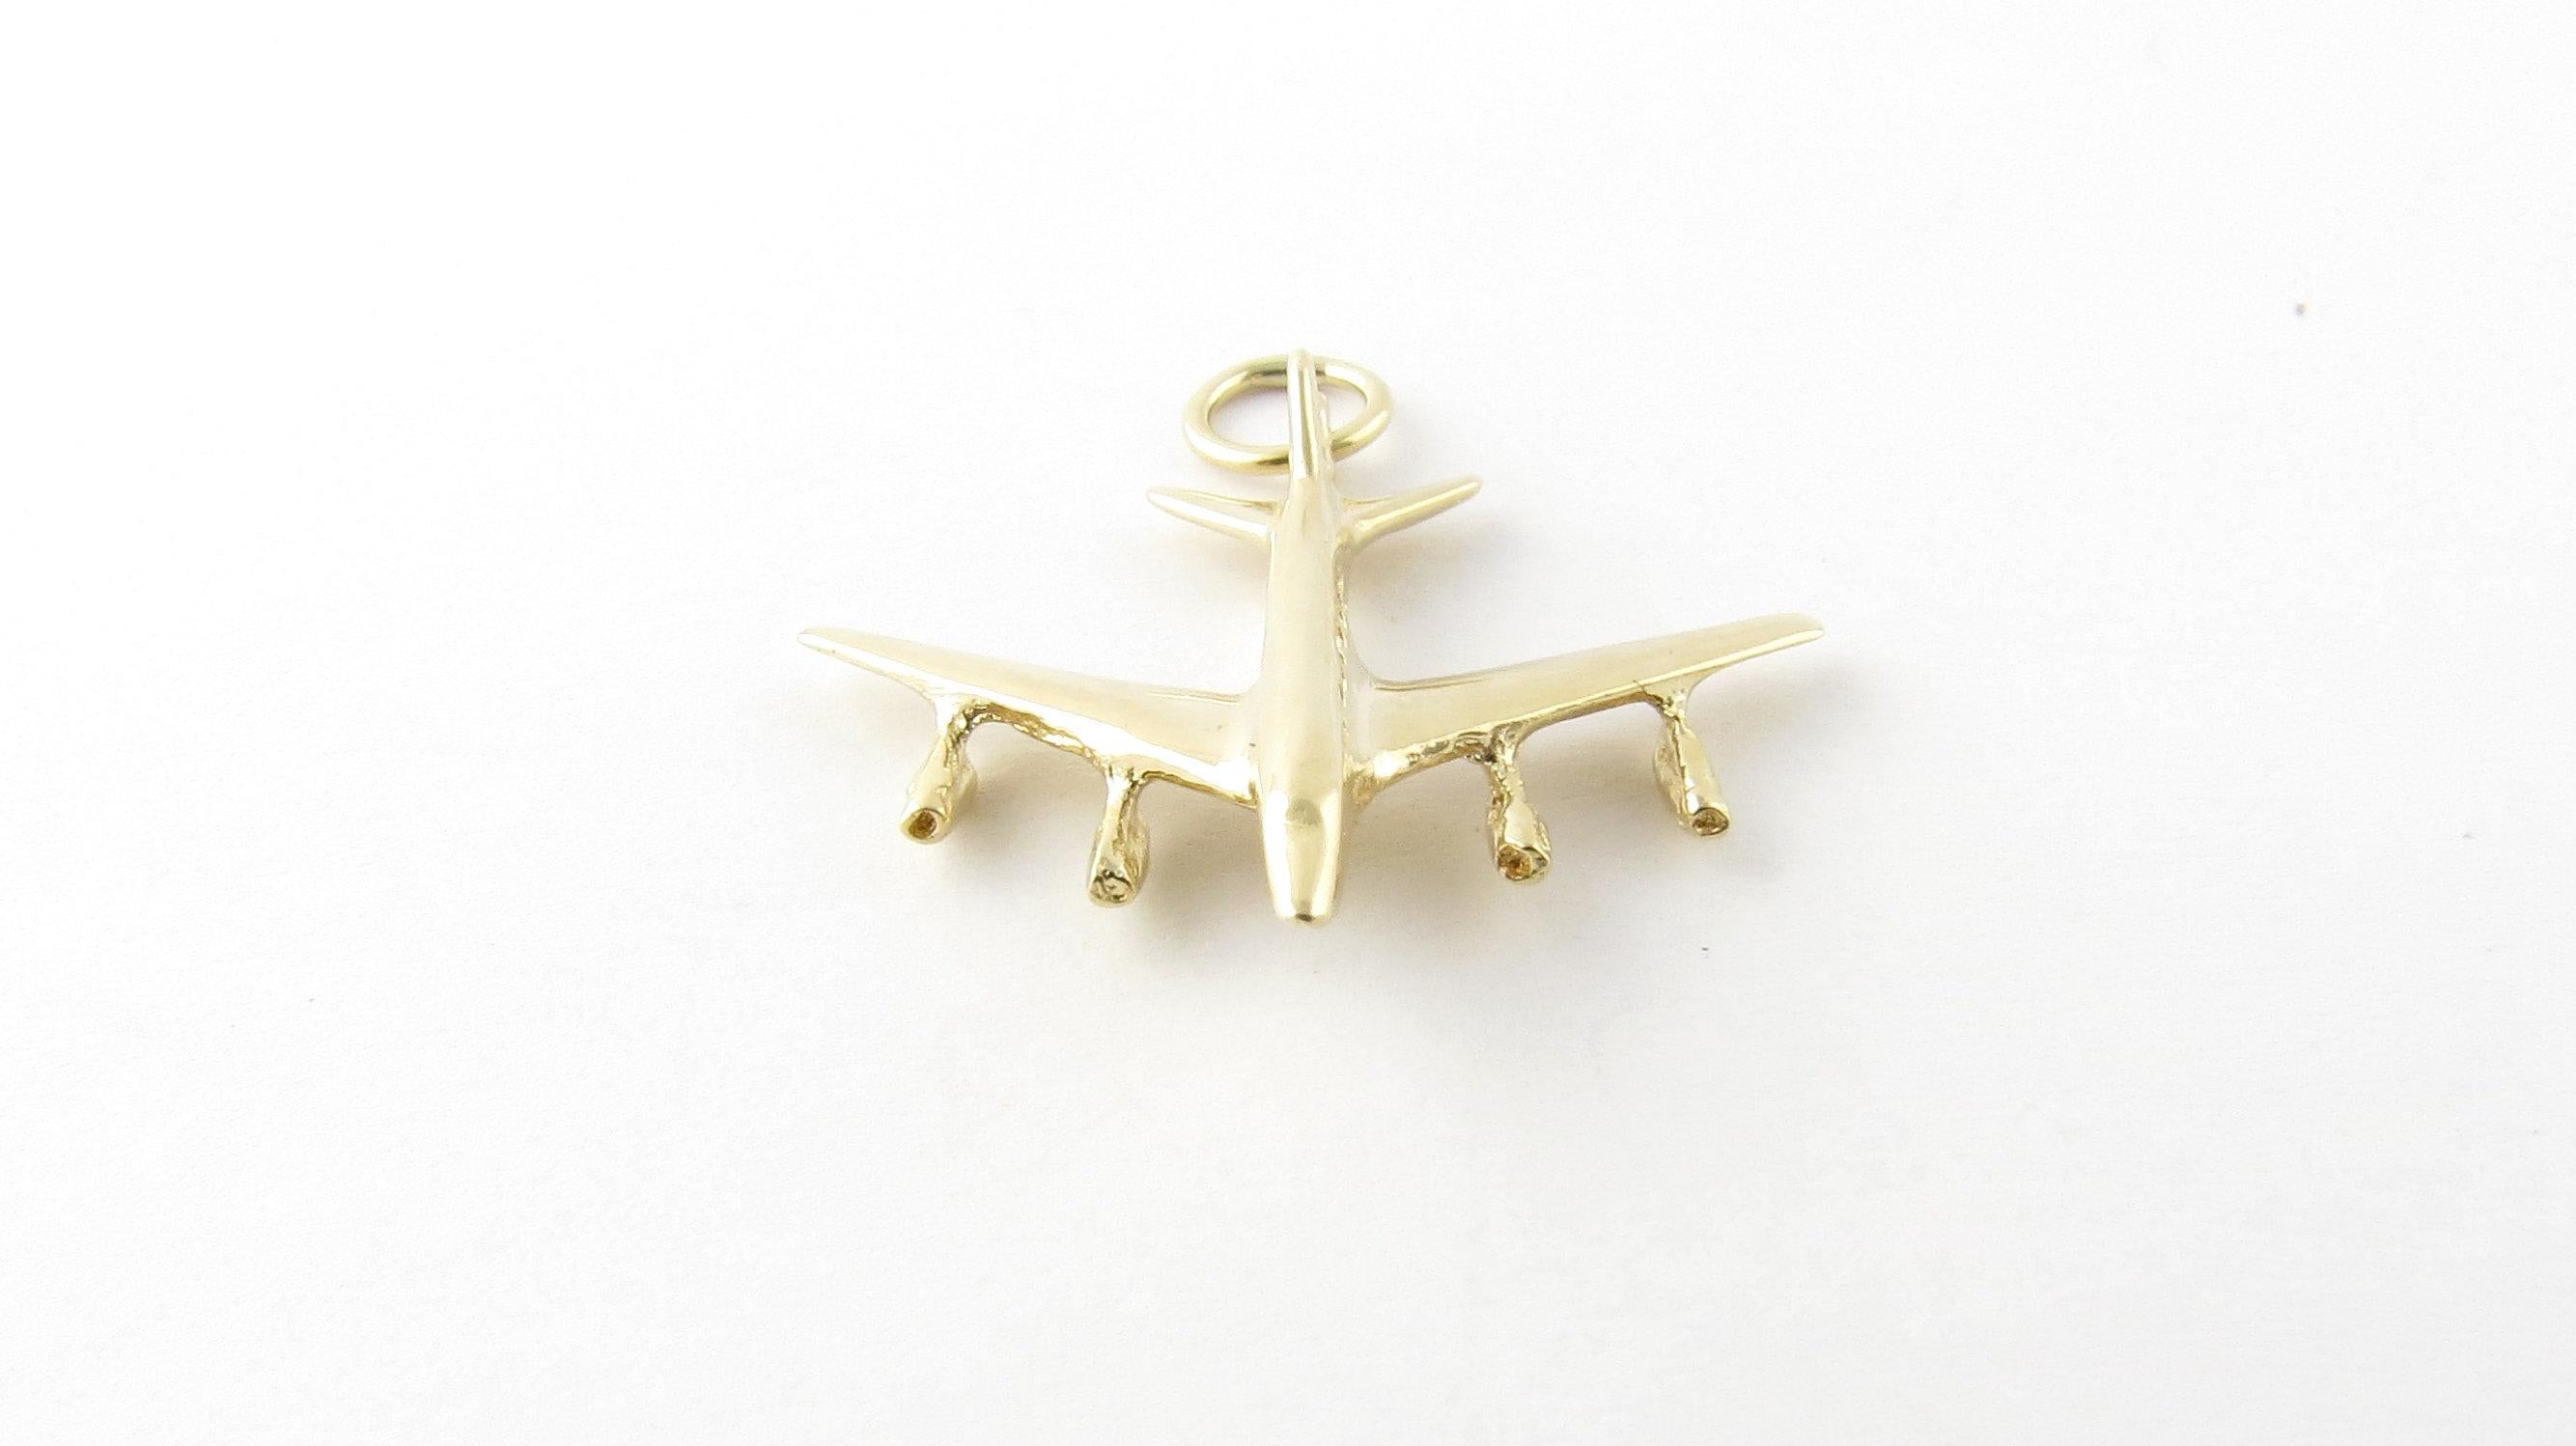 Vintage 14 Karat Yellow Gold Airplane Charm-

Perfect addition to your travel charm collection!

This lovely 3D charm features a miniature airplane meticulously detailed in 14K yellow gold.

Size: 25 mm x 24 mm (actual charm)

Weight: 1.6 dwt. / 2.6